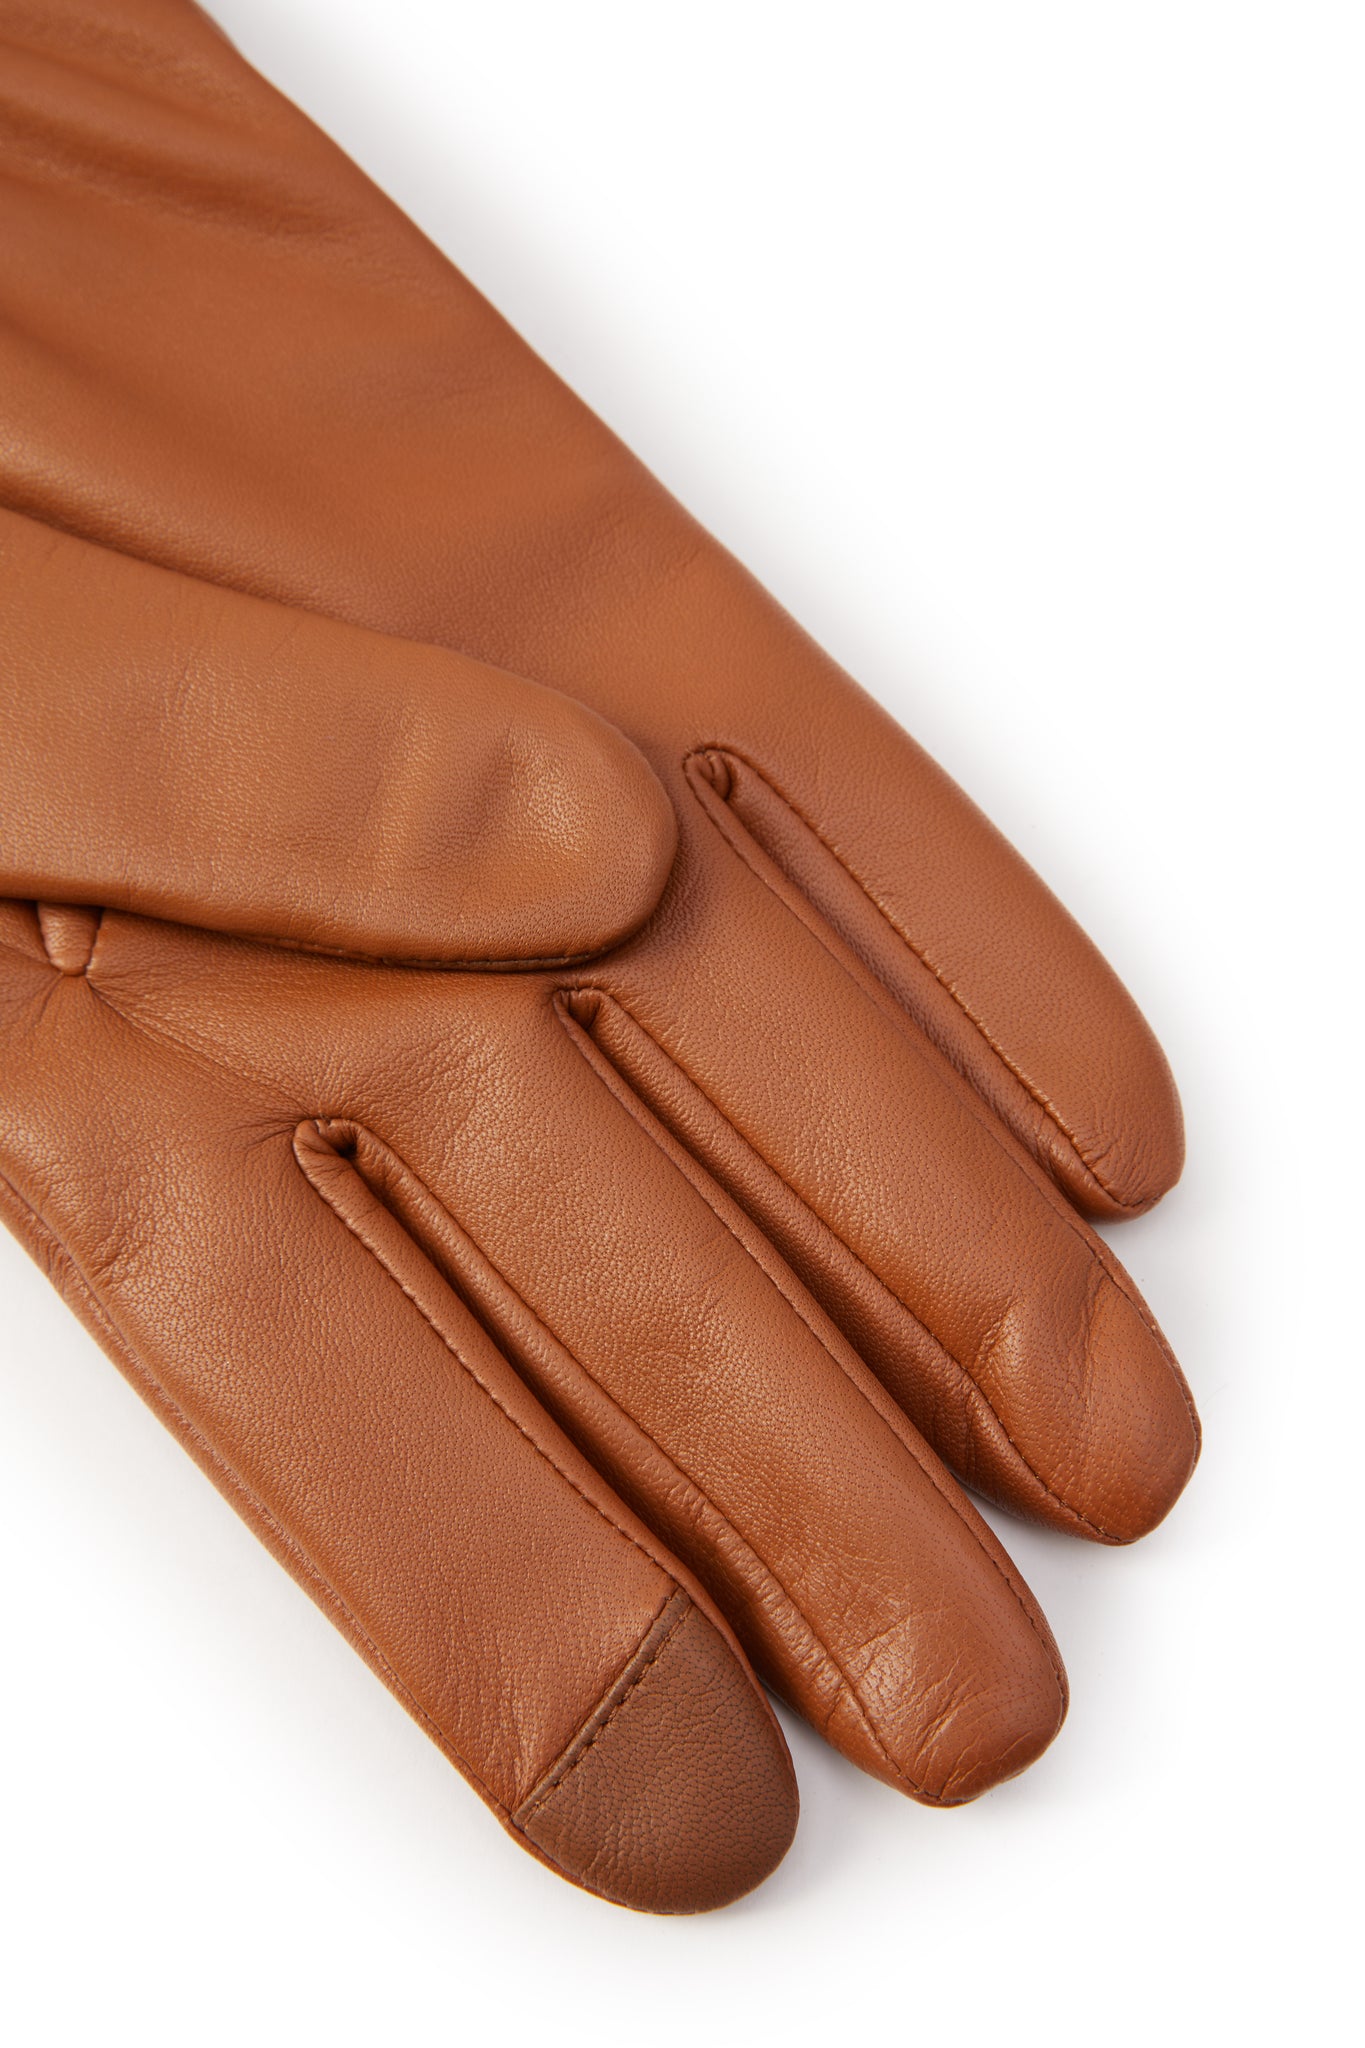 Contrast Leather Gloves (Tan Ink Navy)